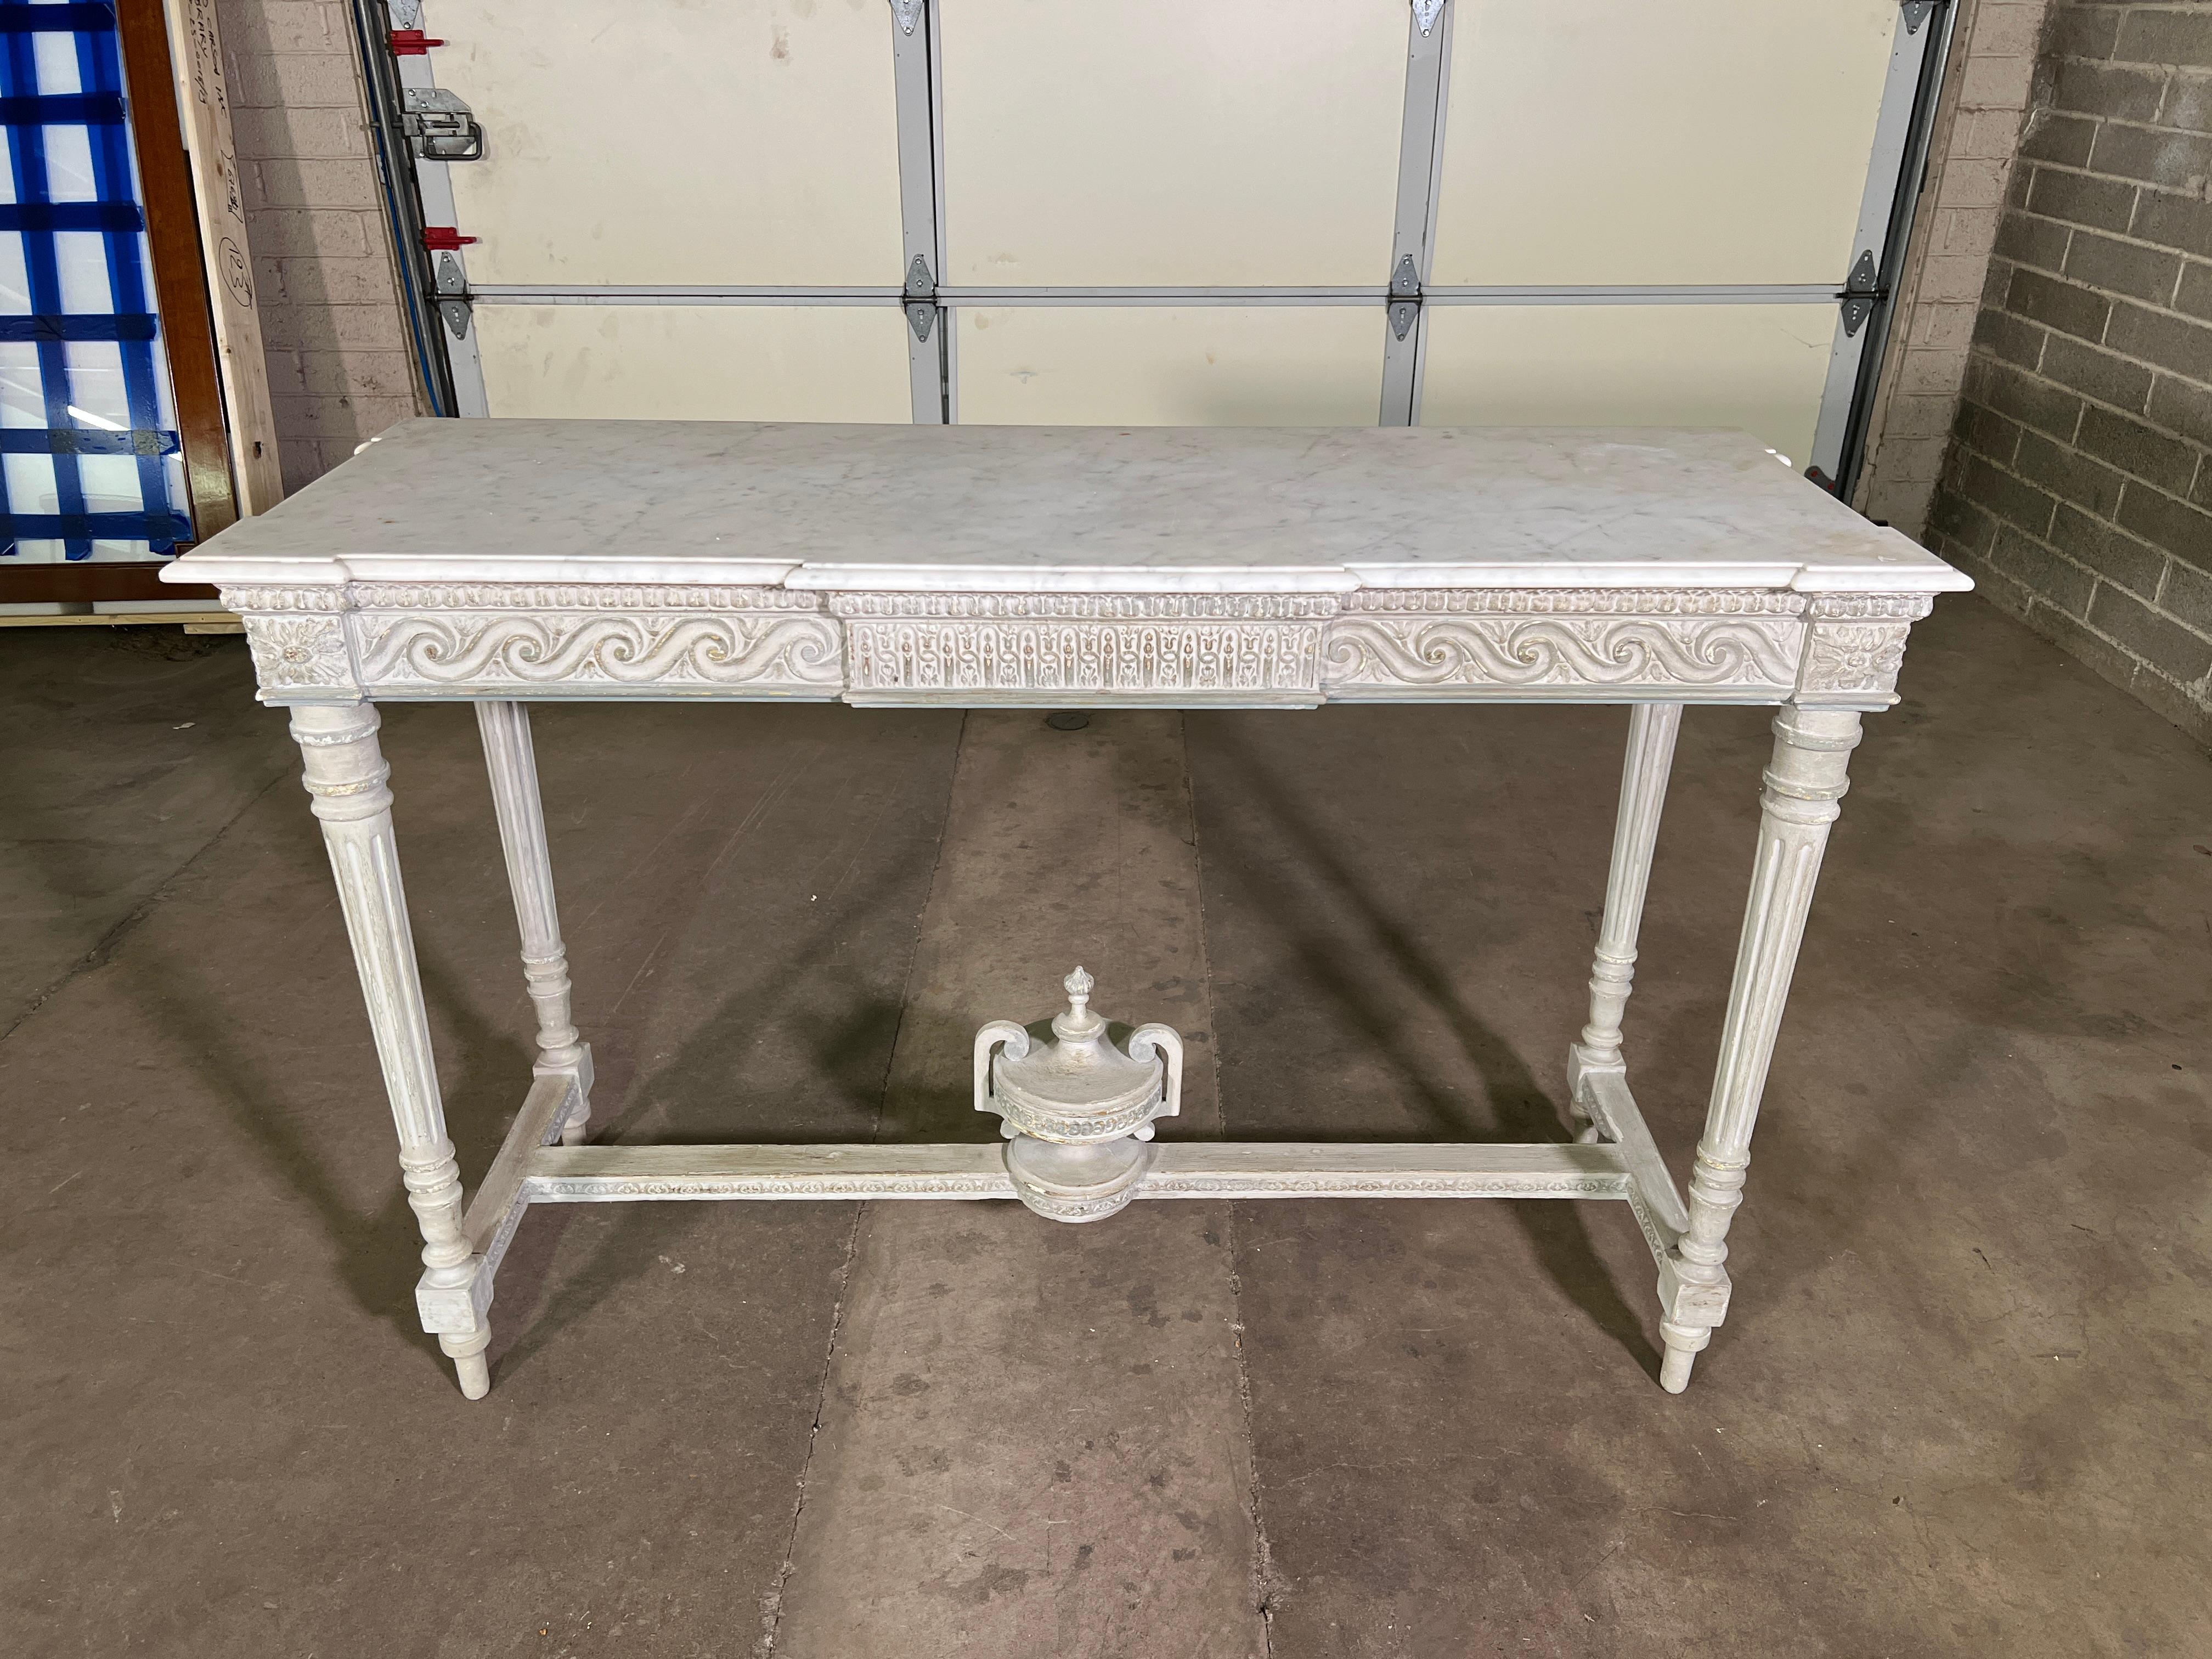 Circa 1830 Louis XVI Style Painted Console
Beautiful piece, see photos. 